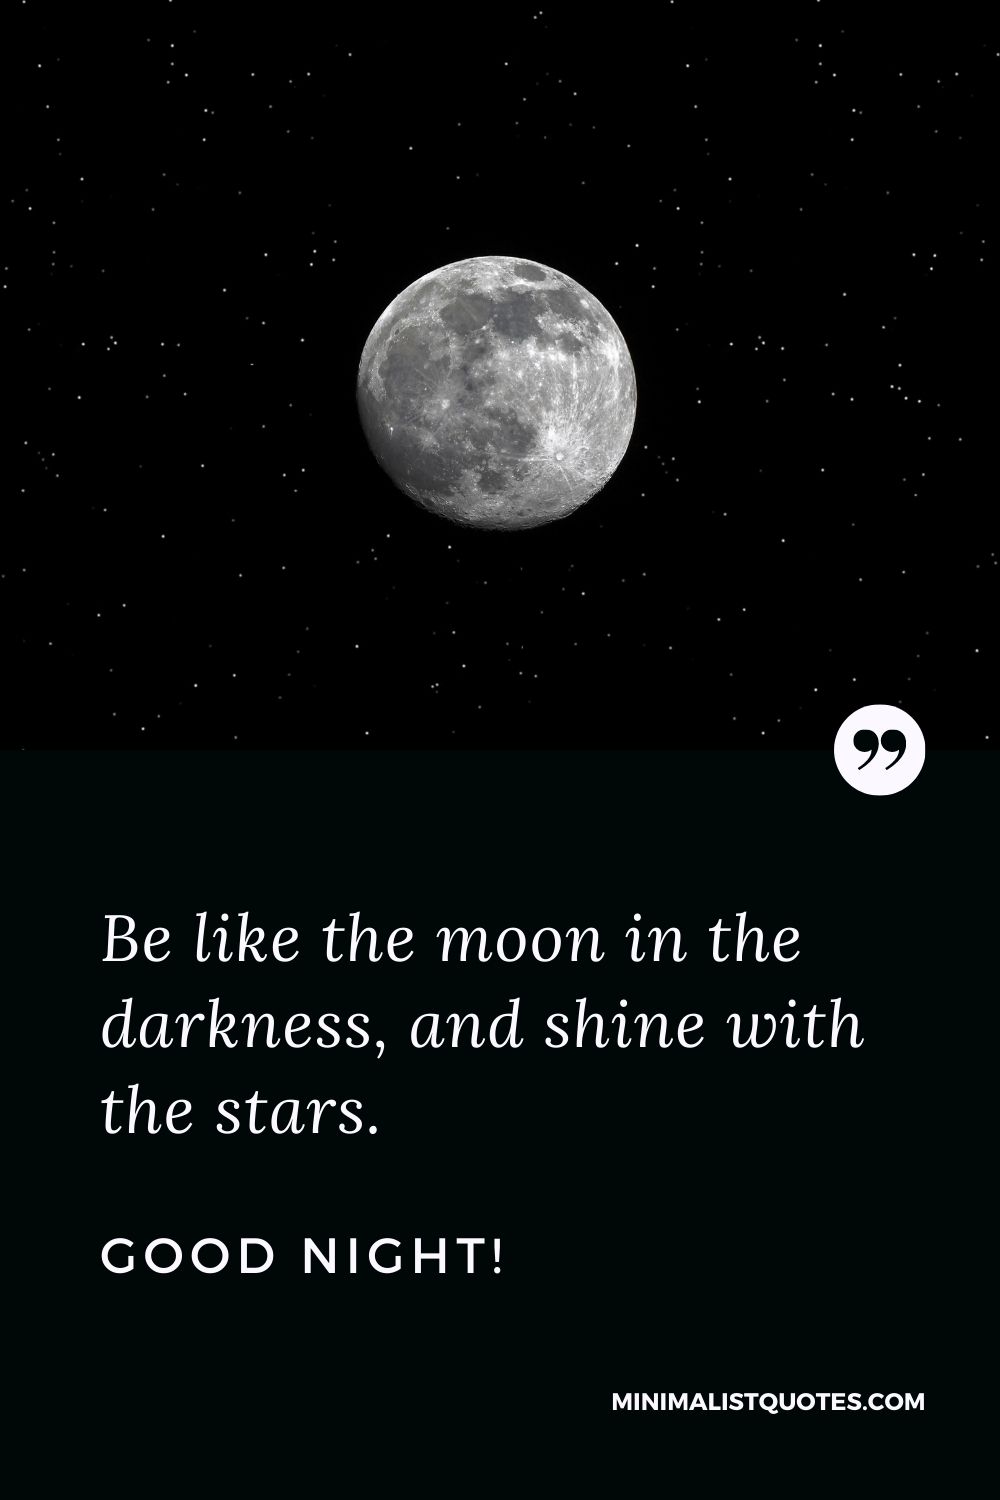 Night Quote, Wish & Message With Image: Be like the moon in the darkness, and shine with the stars. Good Night!